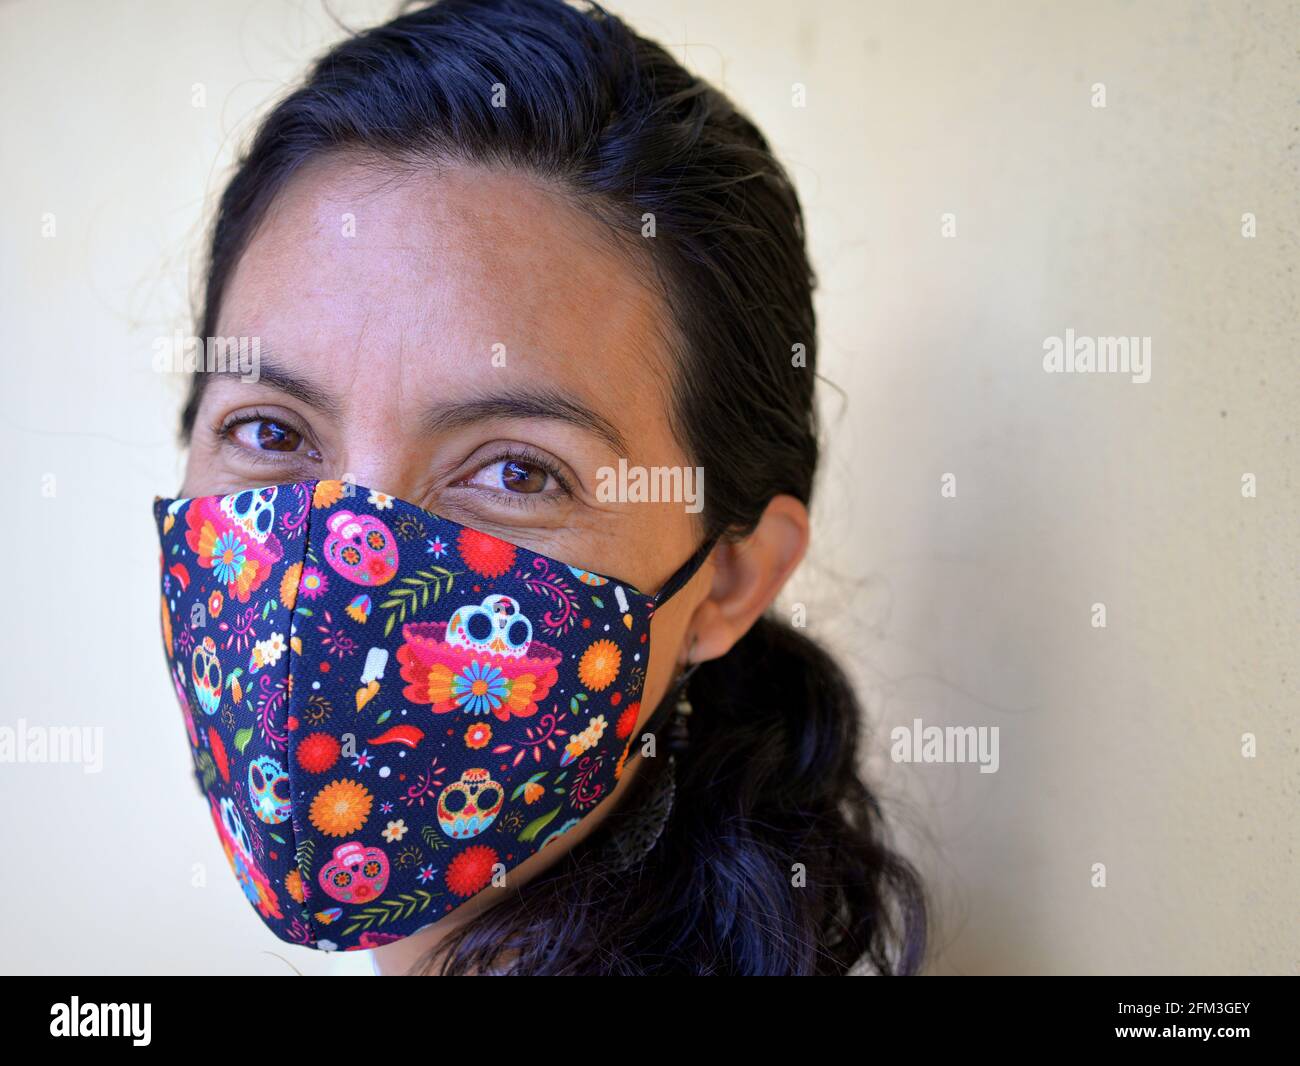 Young Mexican woman poses with stylish printed folkloric Dia-de-los-Muertos (Day of the Dead) cloth face mask during the global coronavirus pandemic. Stock Photo